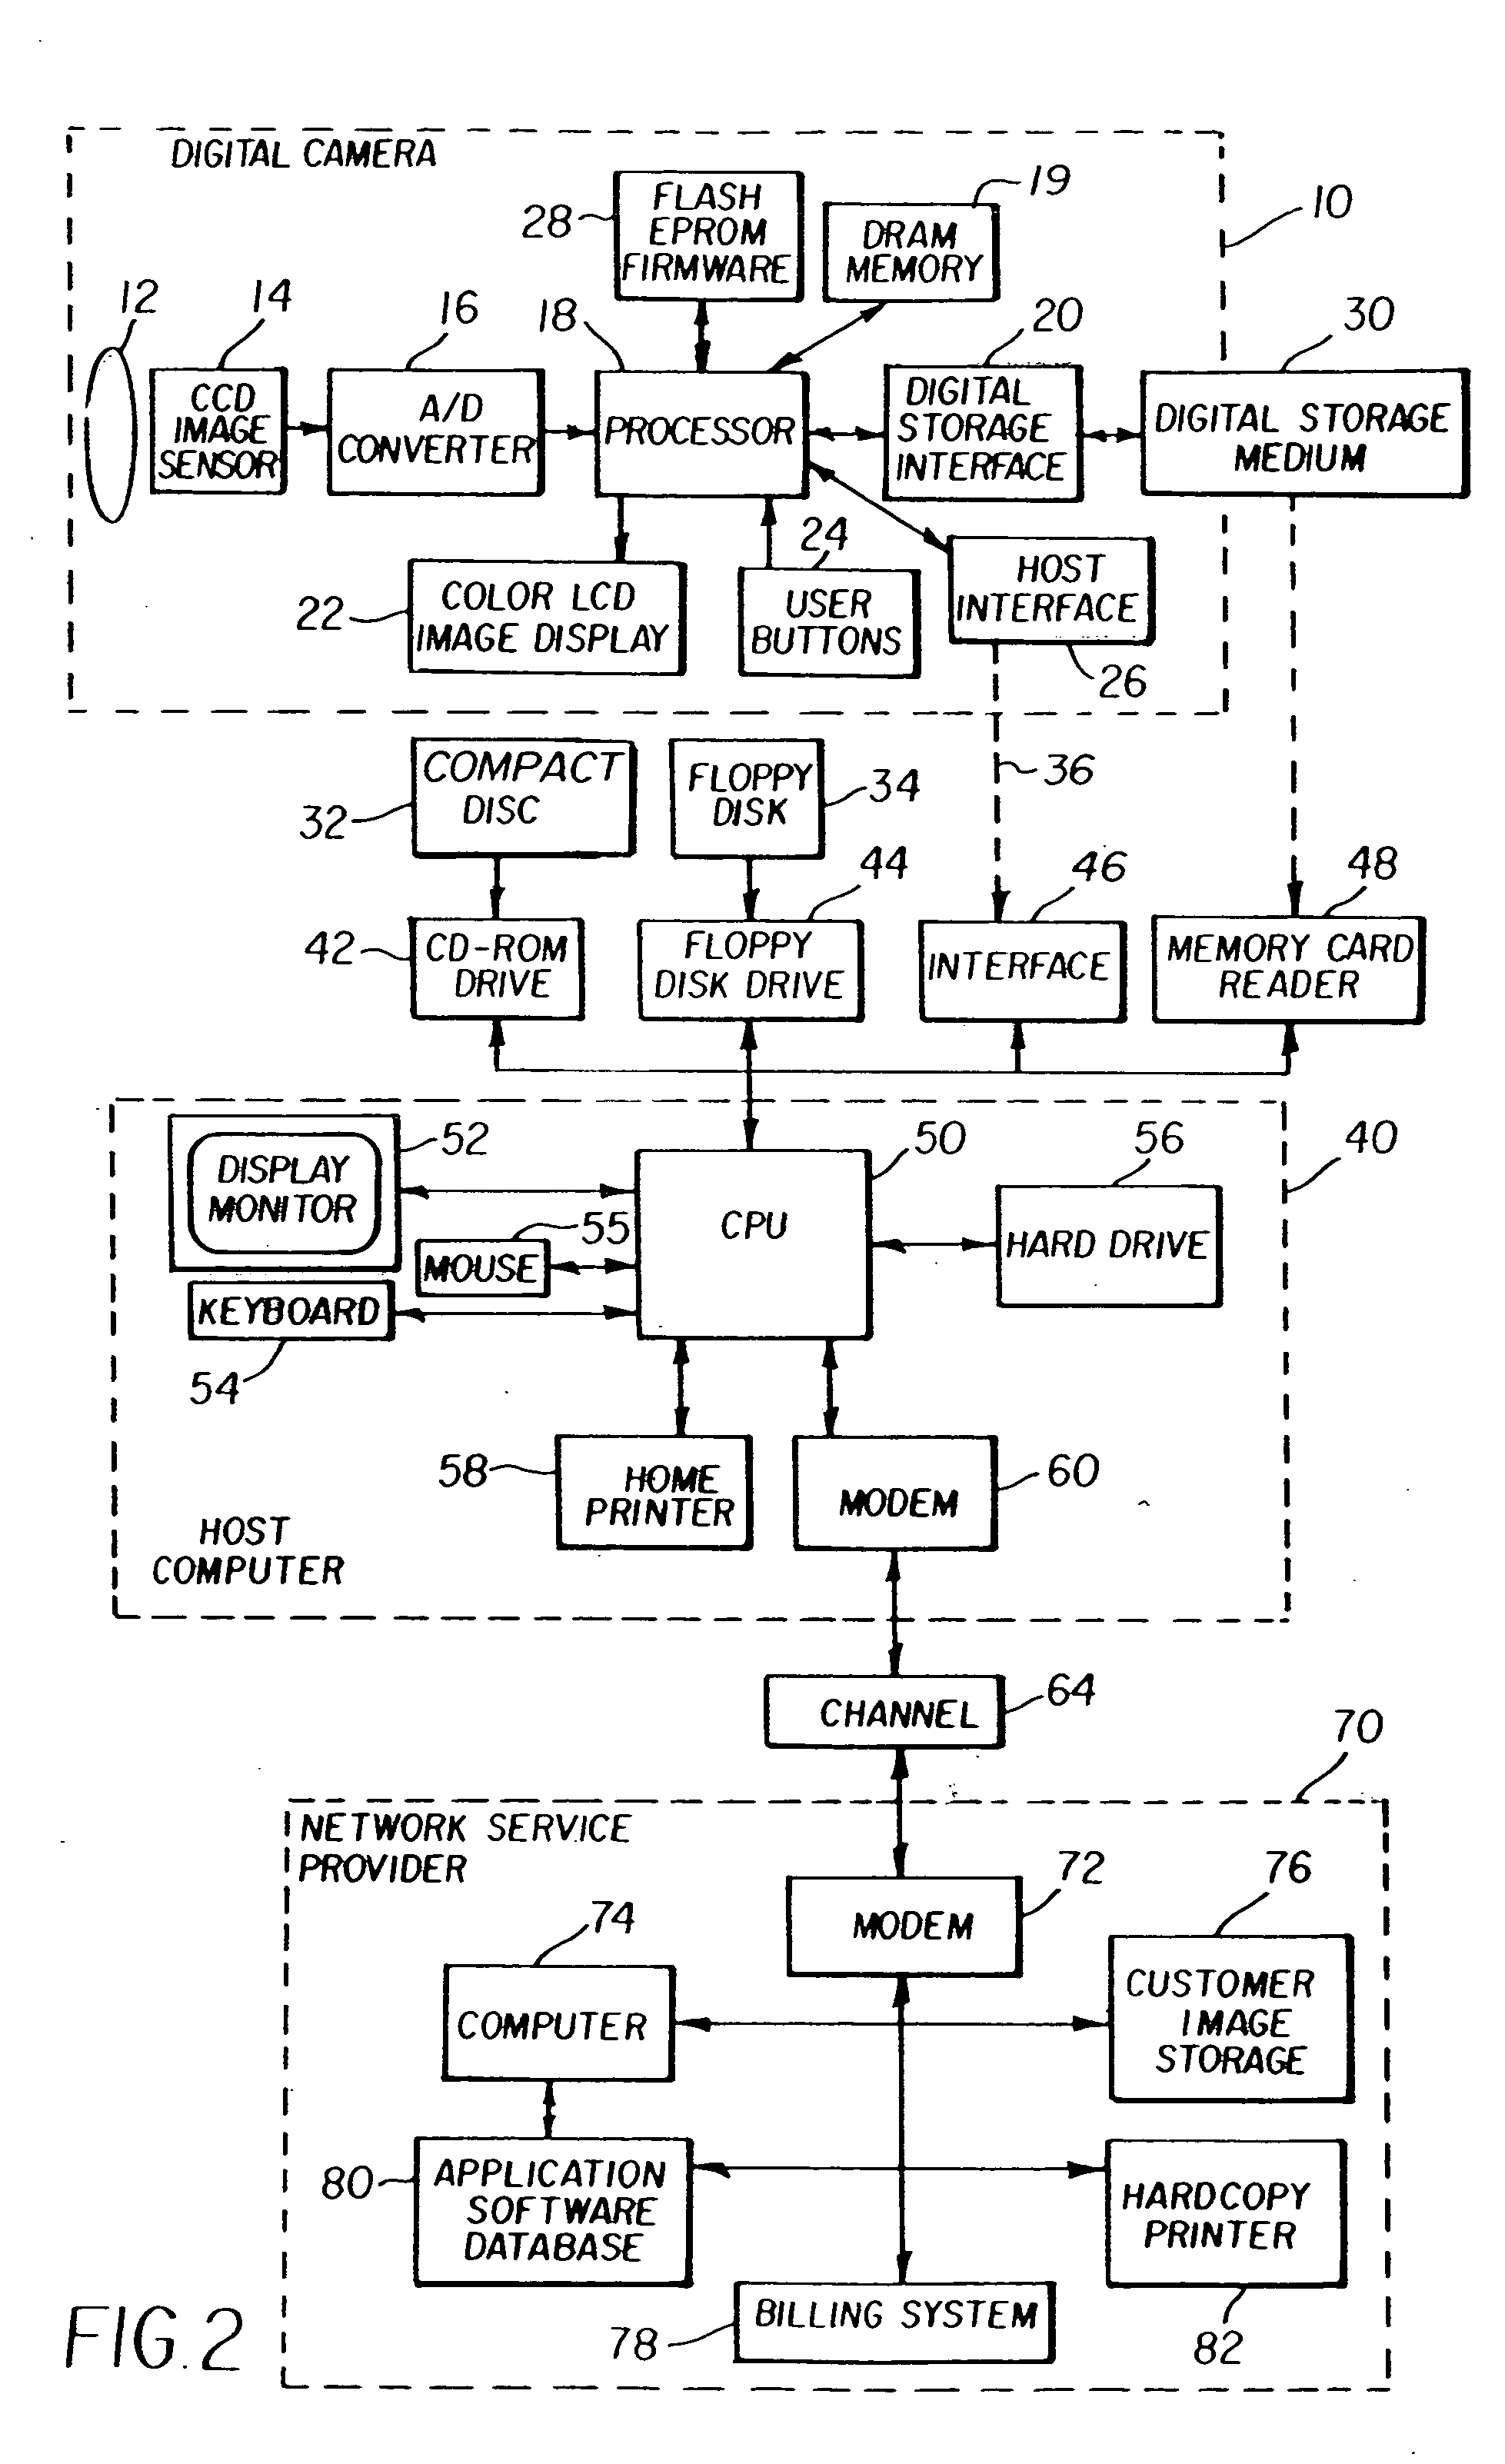 Method for rating images to facilitate image retrieval